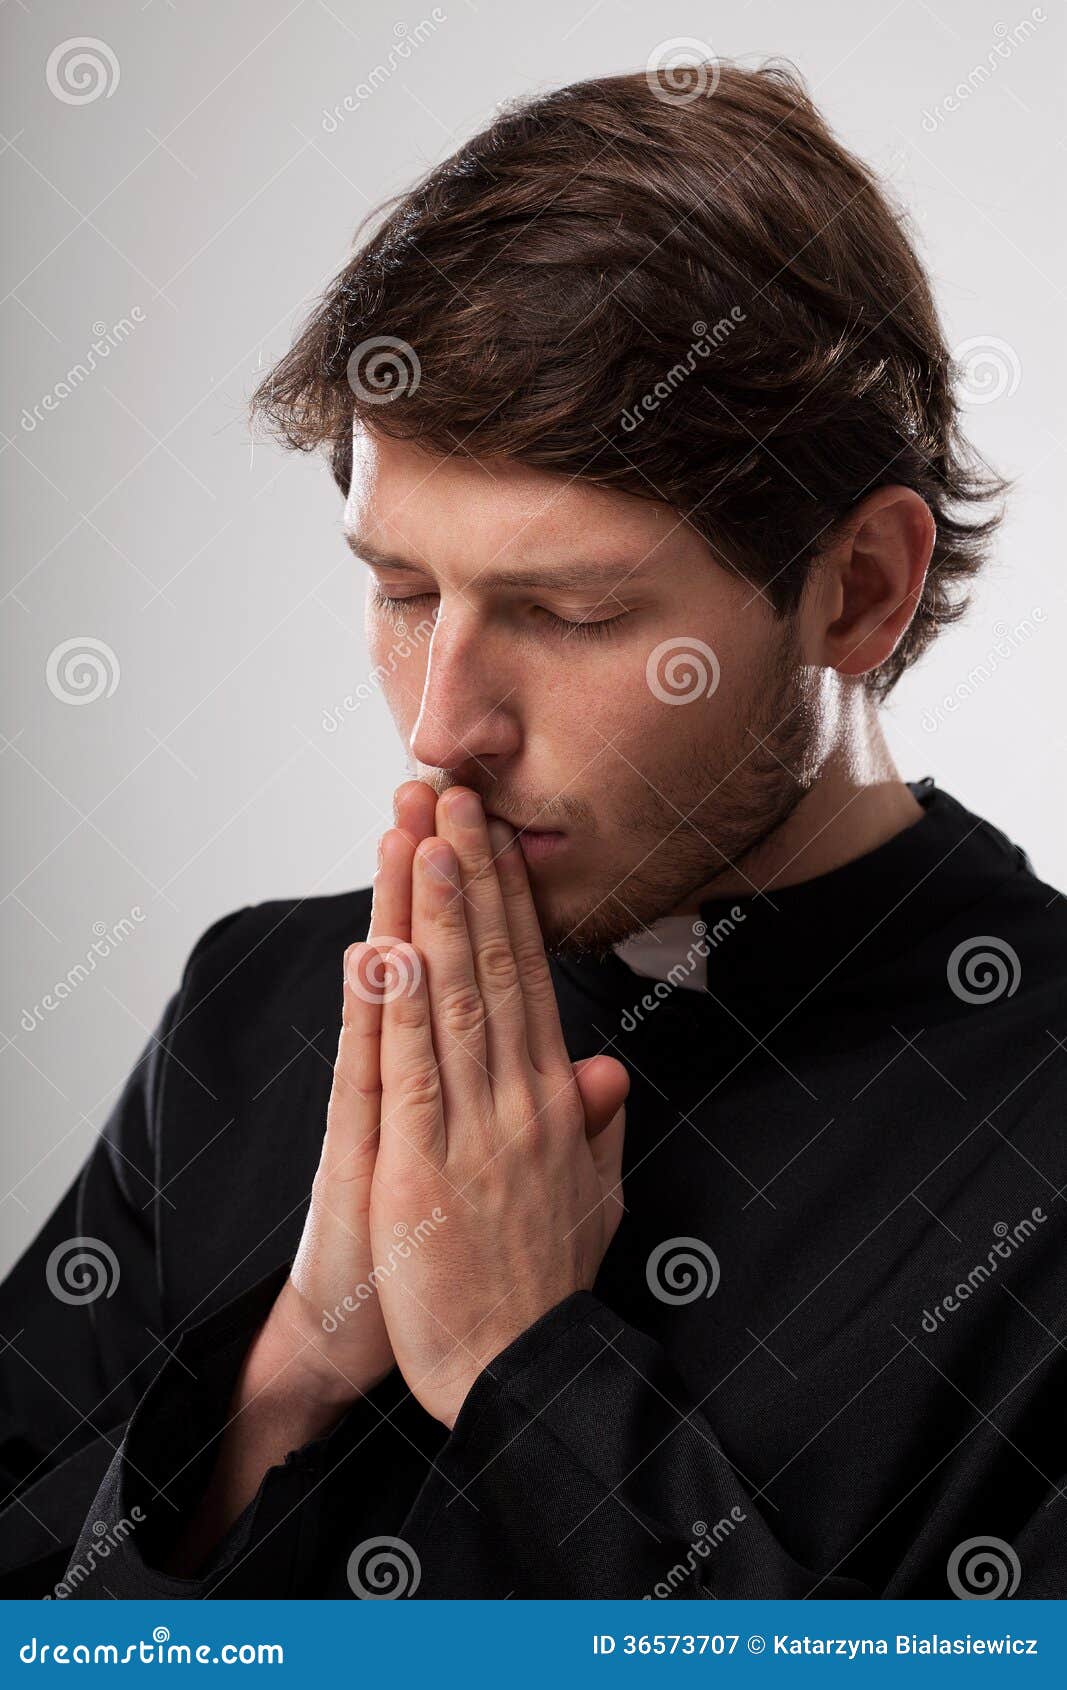 Vicar praying earnestly stock image. Image of white, contemplation ...